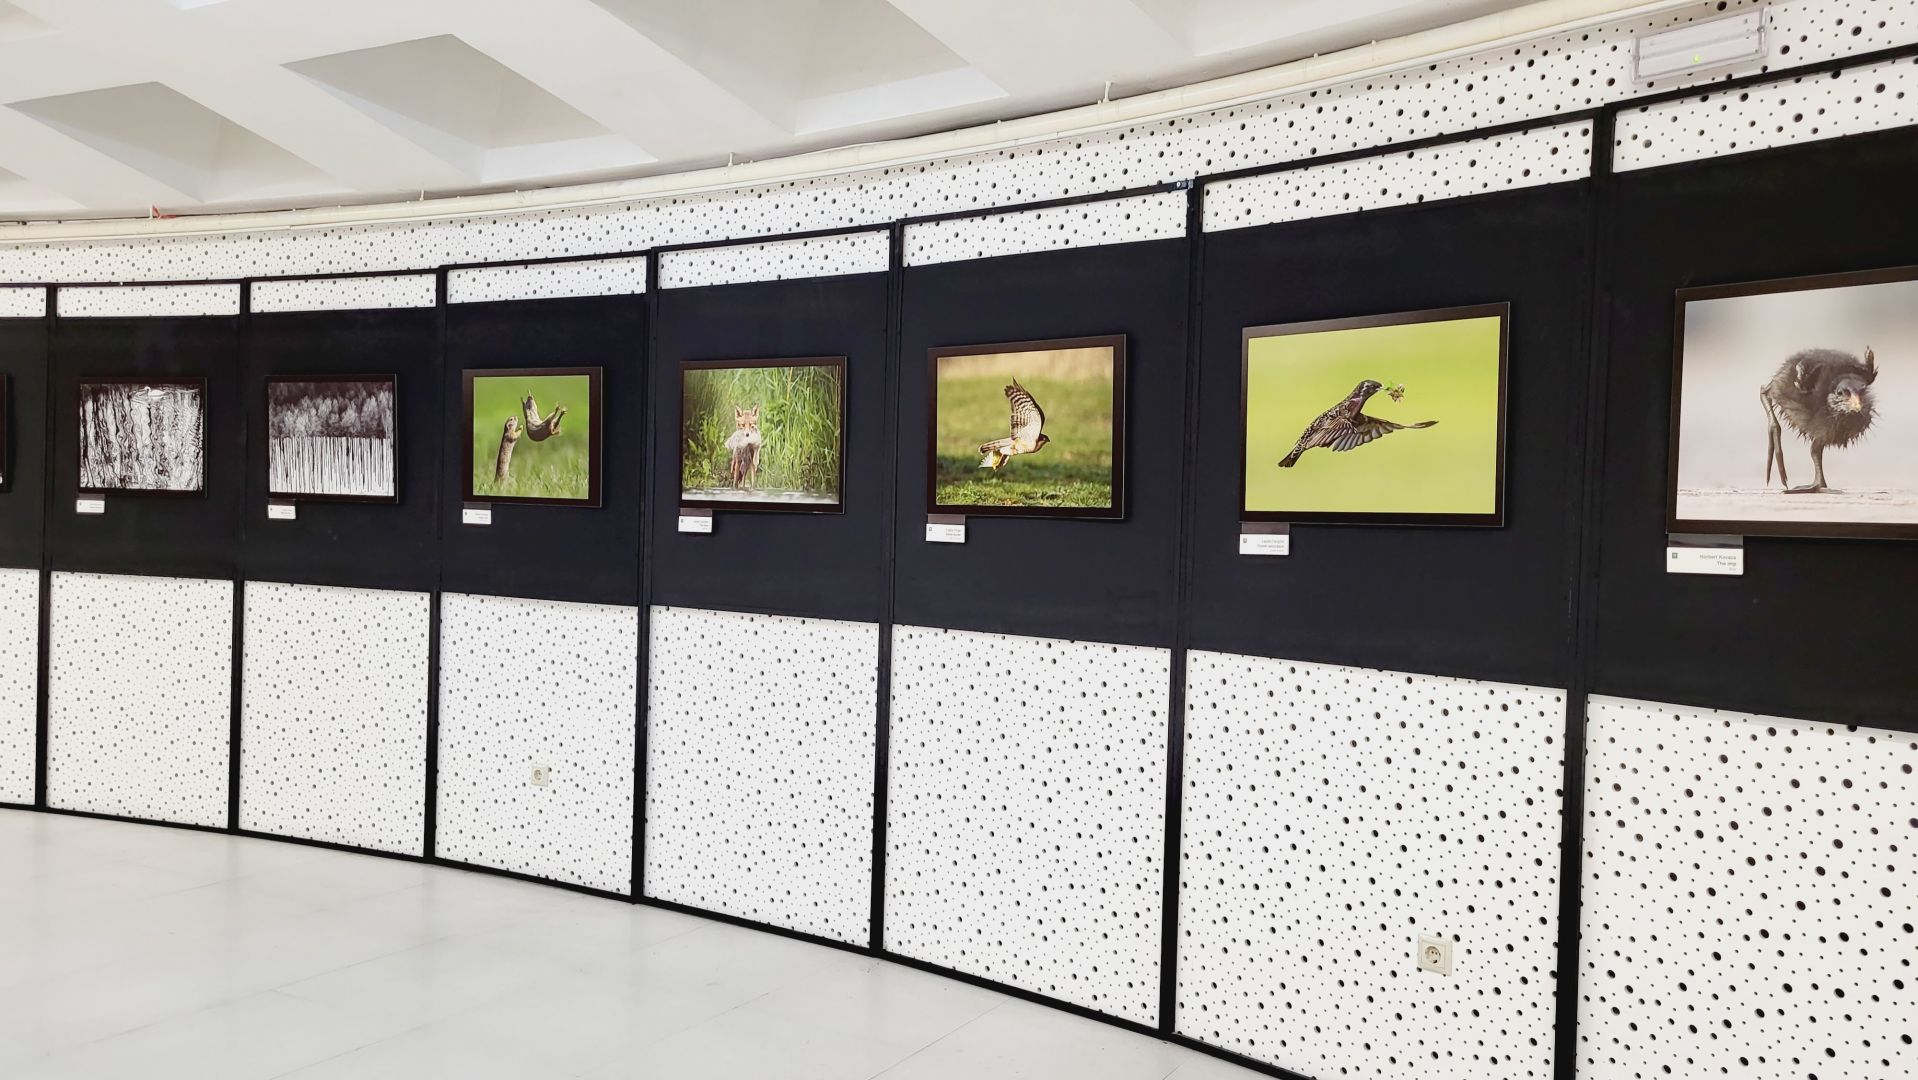 Photos of Azerbaijani nature exhibited among best photos chosen for competition, says naturArt President [EXCLUSIVE] - Gallery Image